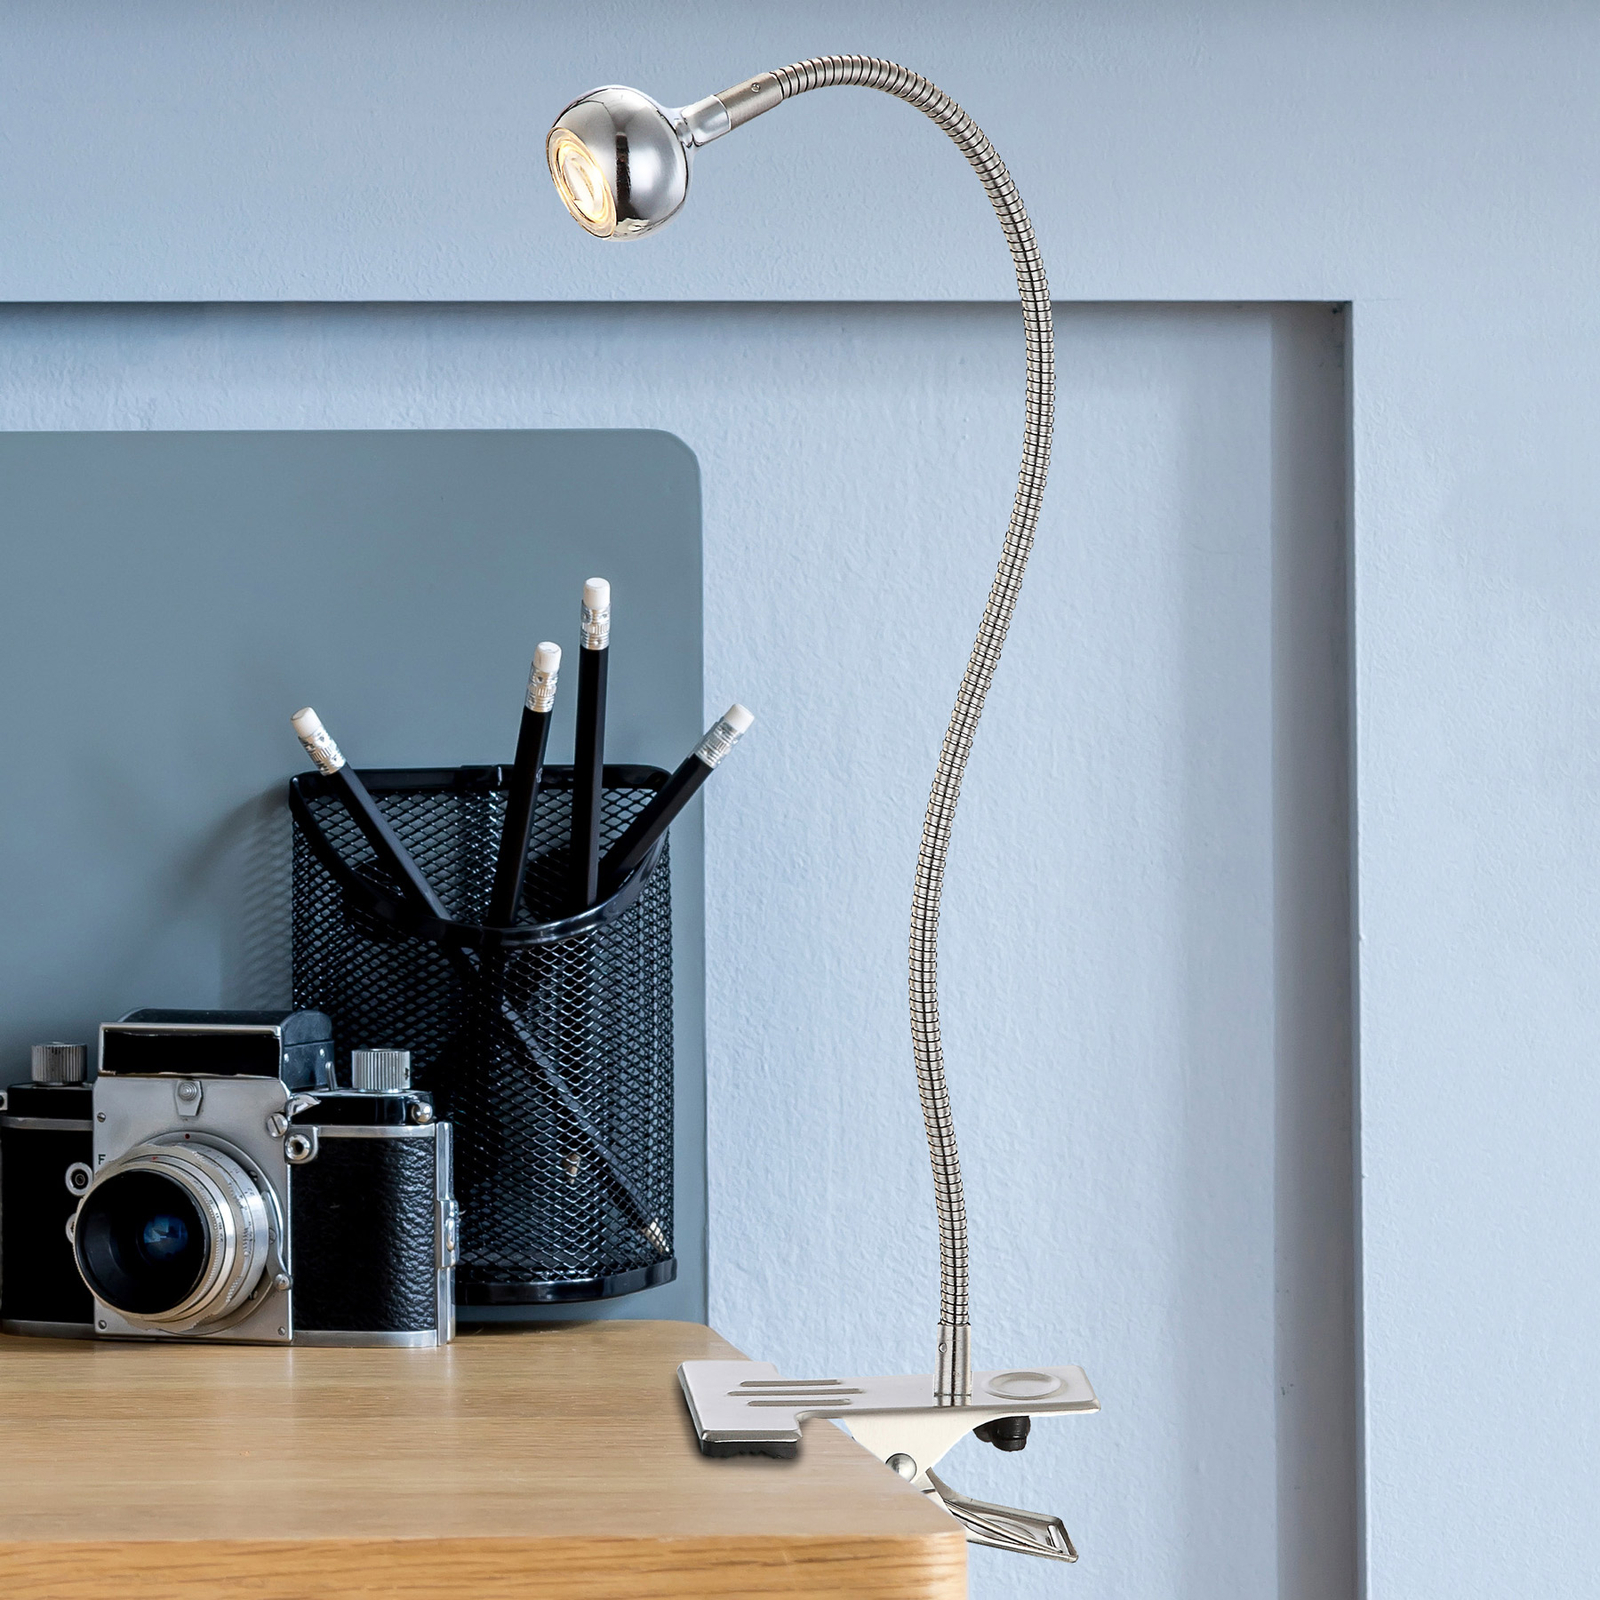 Serpent LED clip-on light with a flexible arm